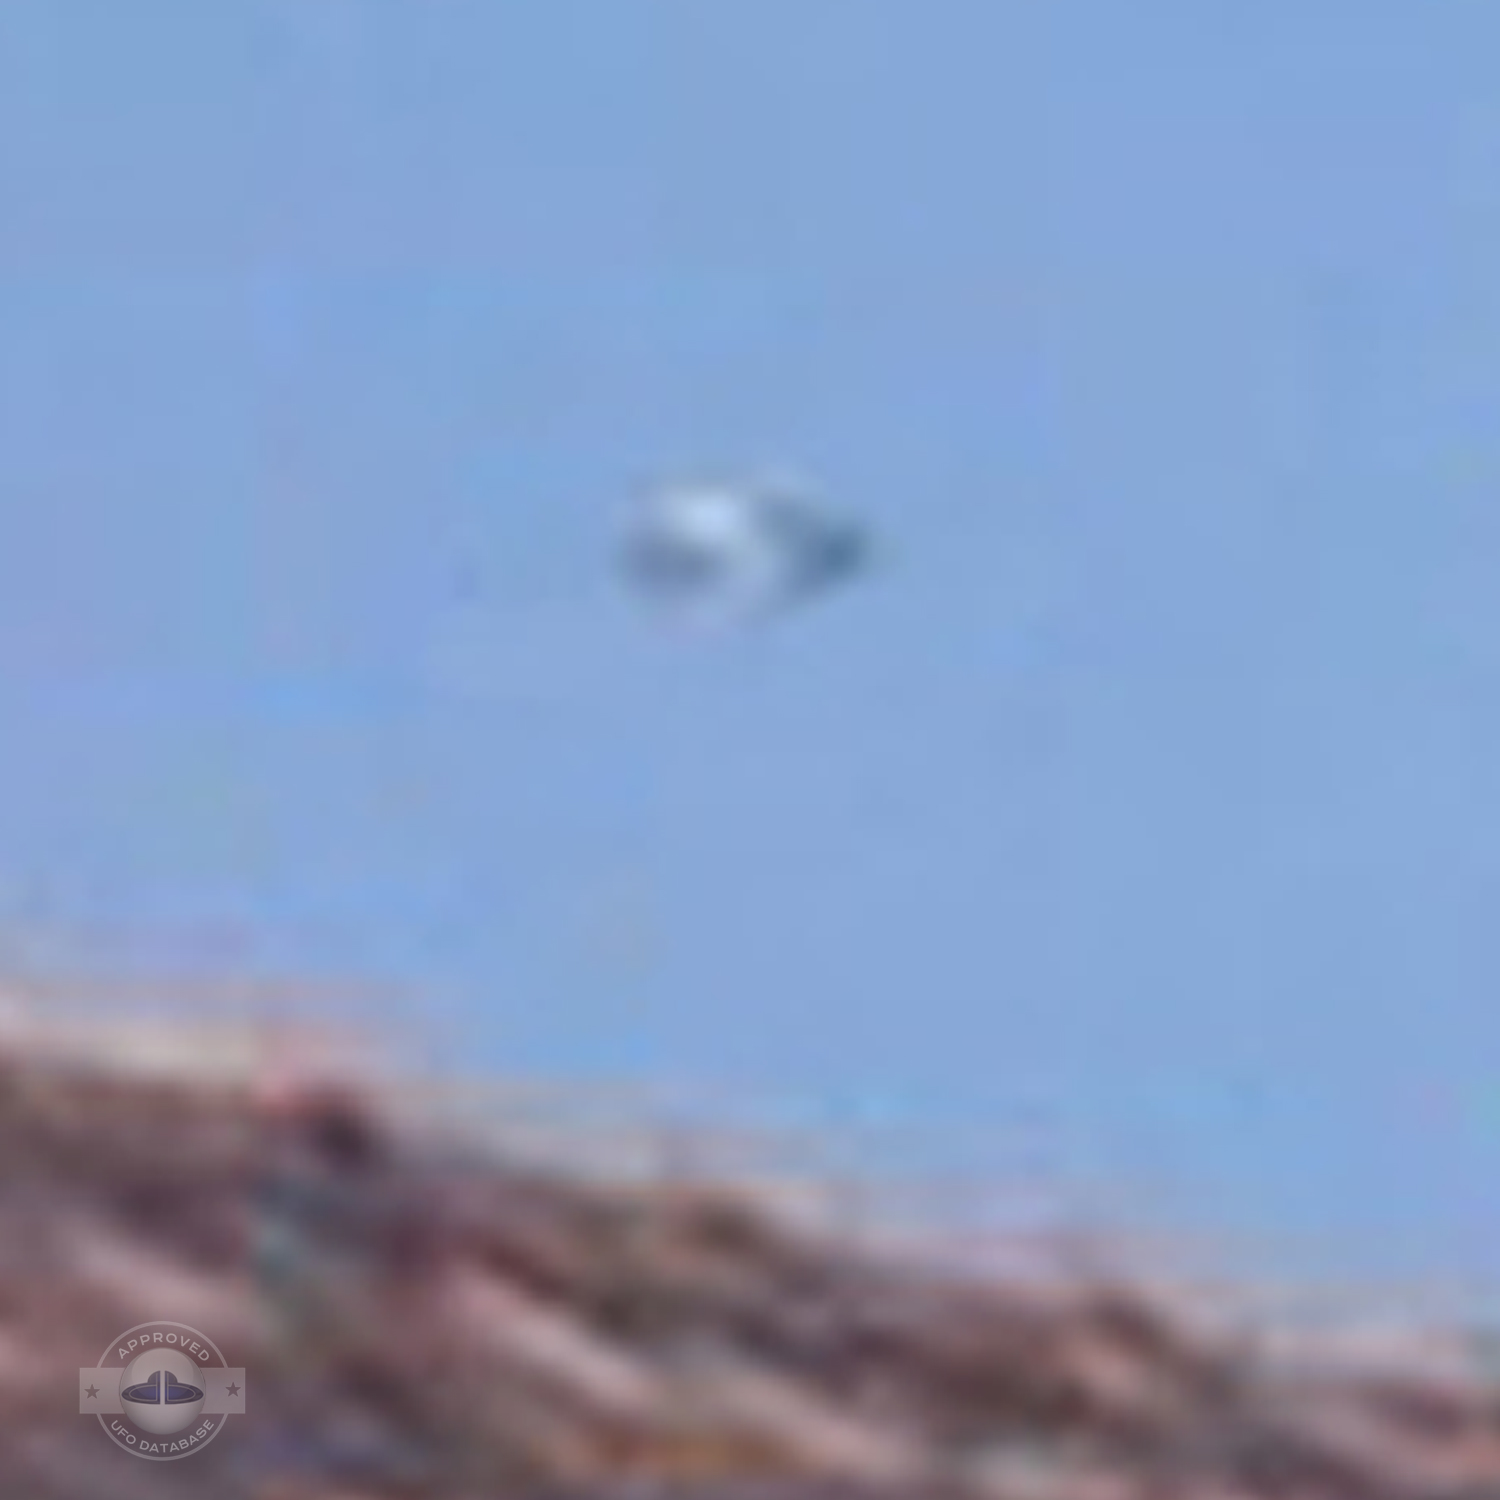 Fast Saucer UFO over houses of Ibirite, Minas Gerais, Brazil | 2008 UFO Picture #214-5